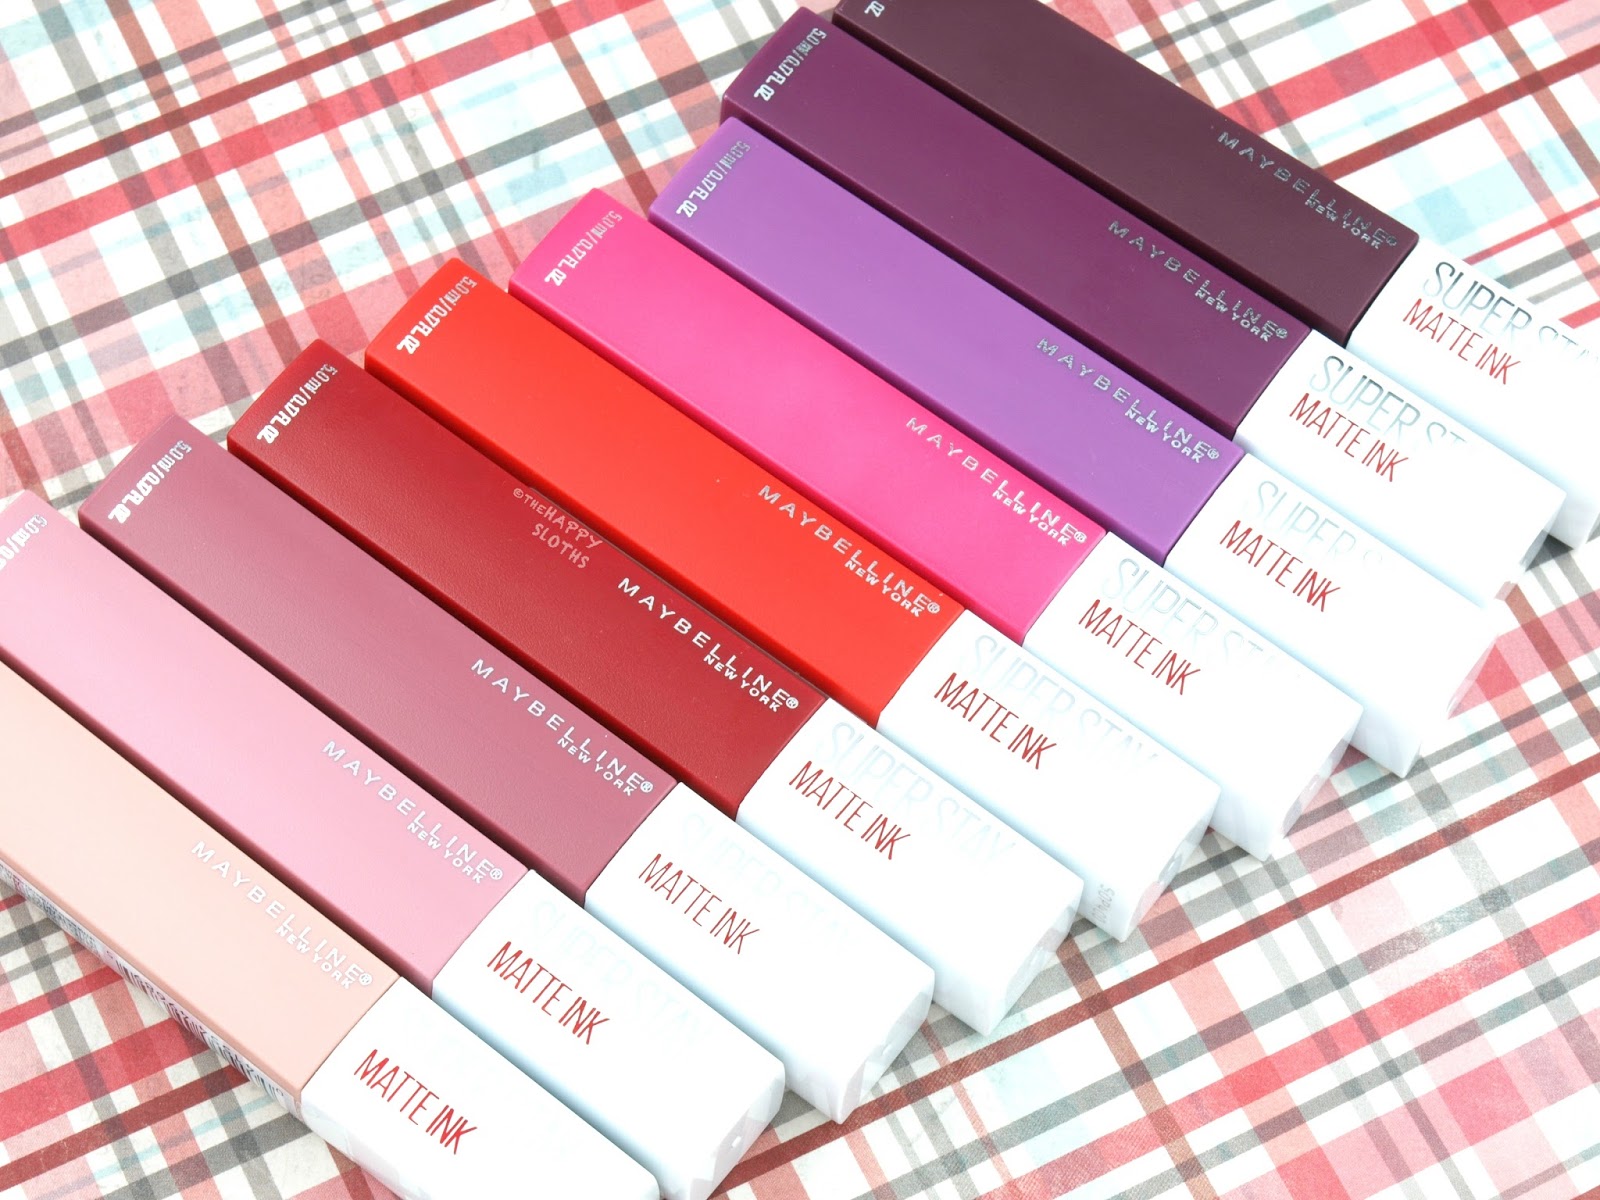 Maybelline Superstay Matte Ink Liquid Lipstick: Review and Swatches